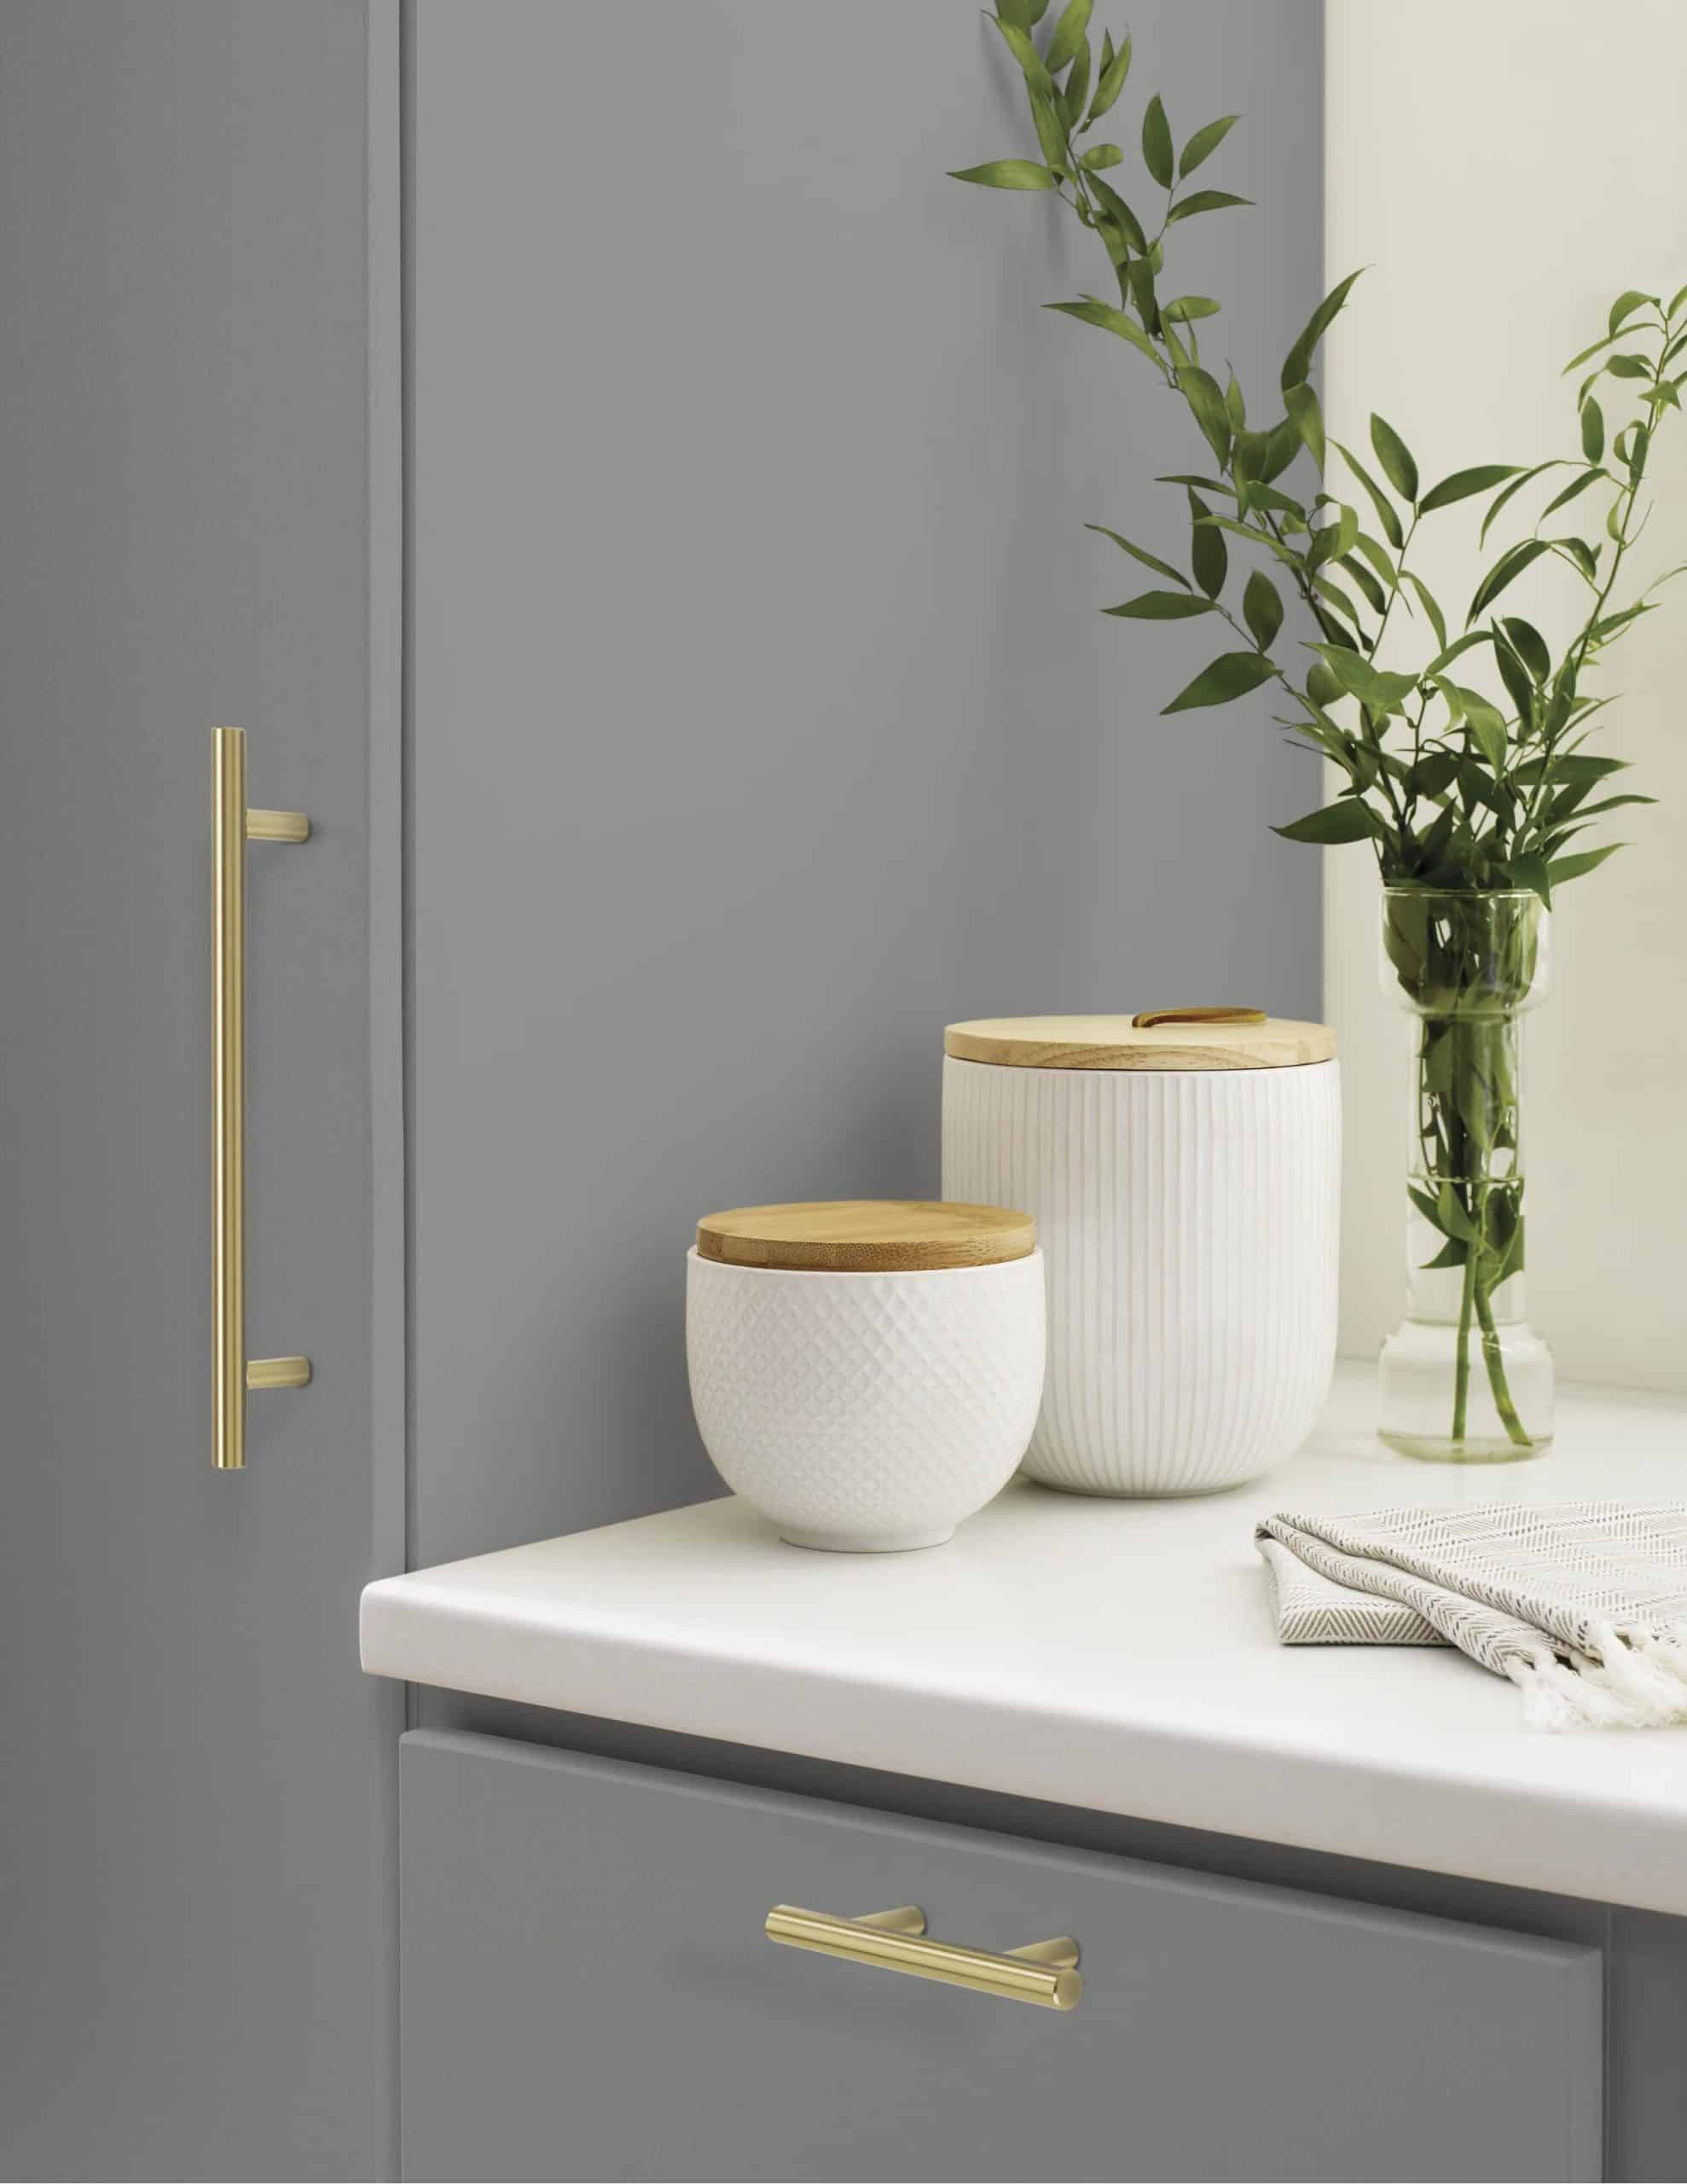 Pick Simple Golden Pulls For Your Dark Gray Cabinets